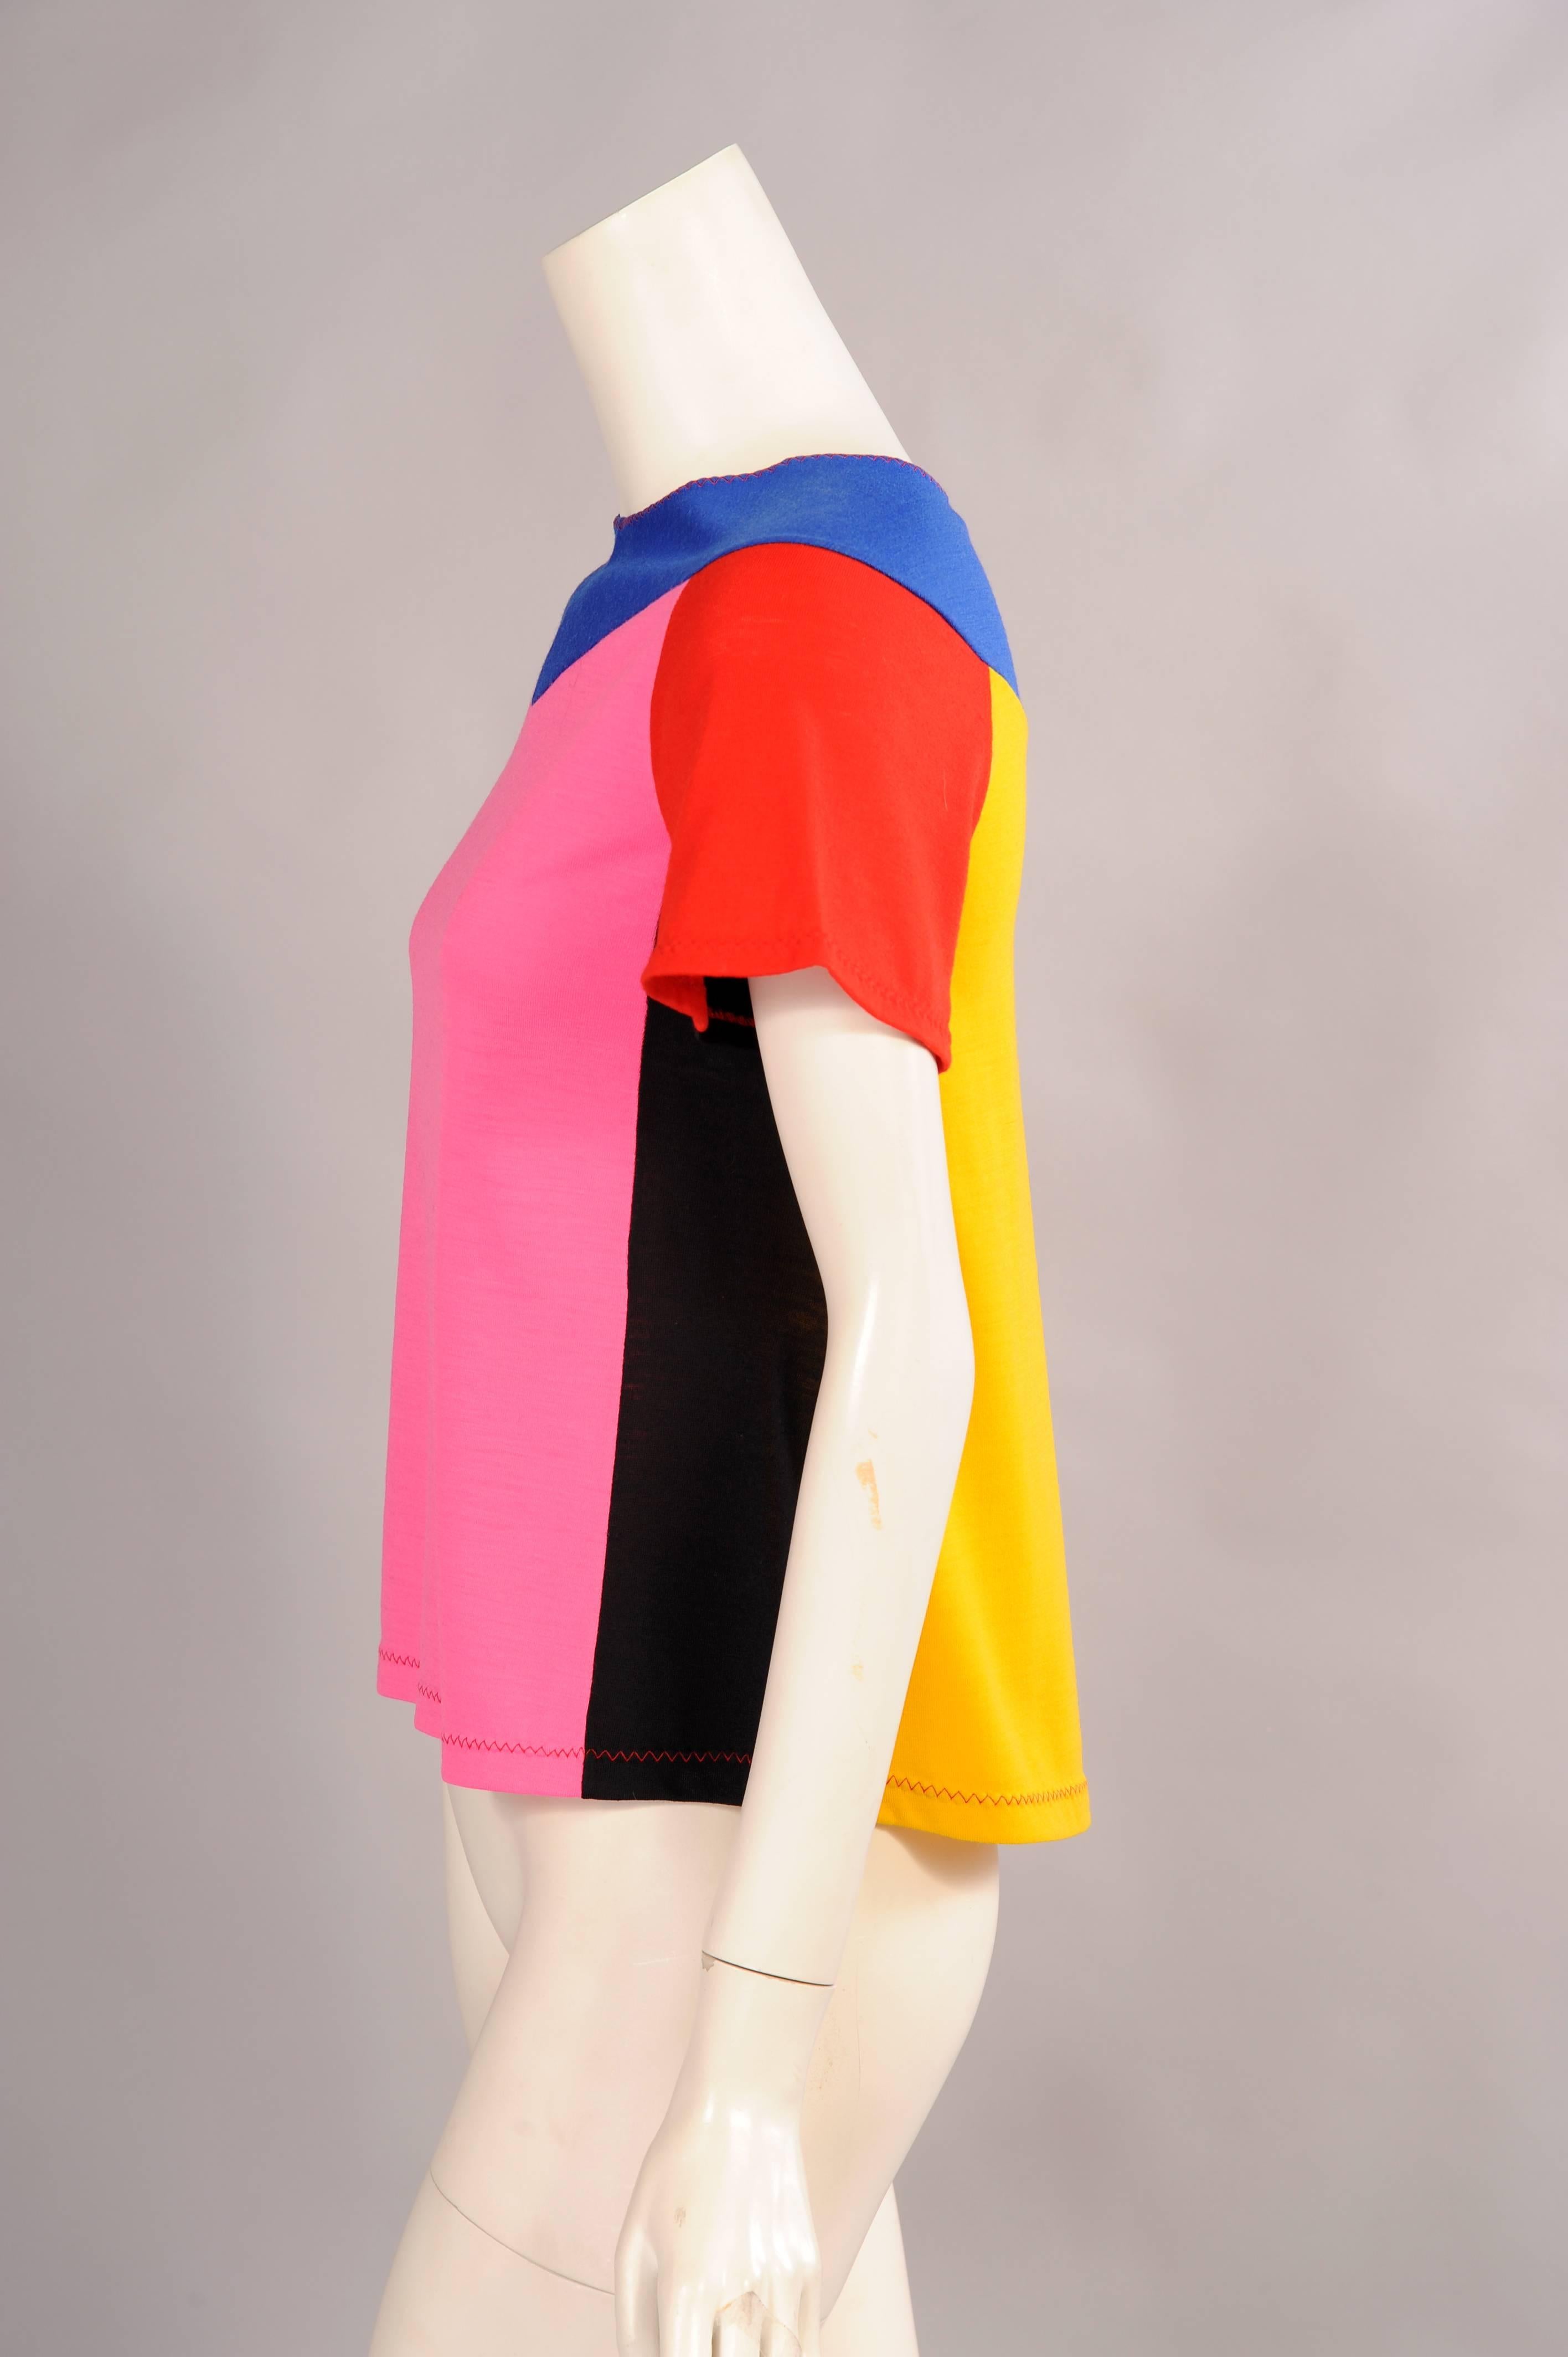 Retailed by Giorgio of Beverly Hills this fun top from Stephen Burrows is made from five different colored fabrics. The top is edged with red stitching at the neckline, sleeves and hem. It is in excellent condition.
Measurements;
Shoulders